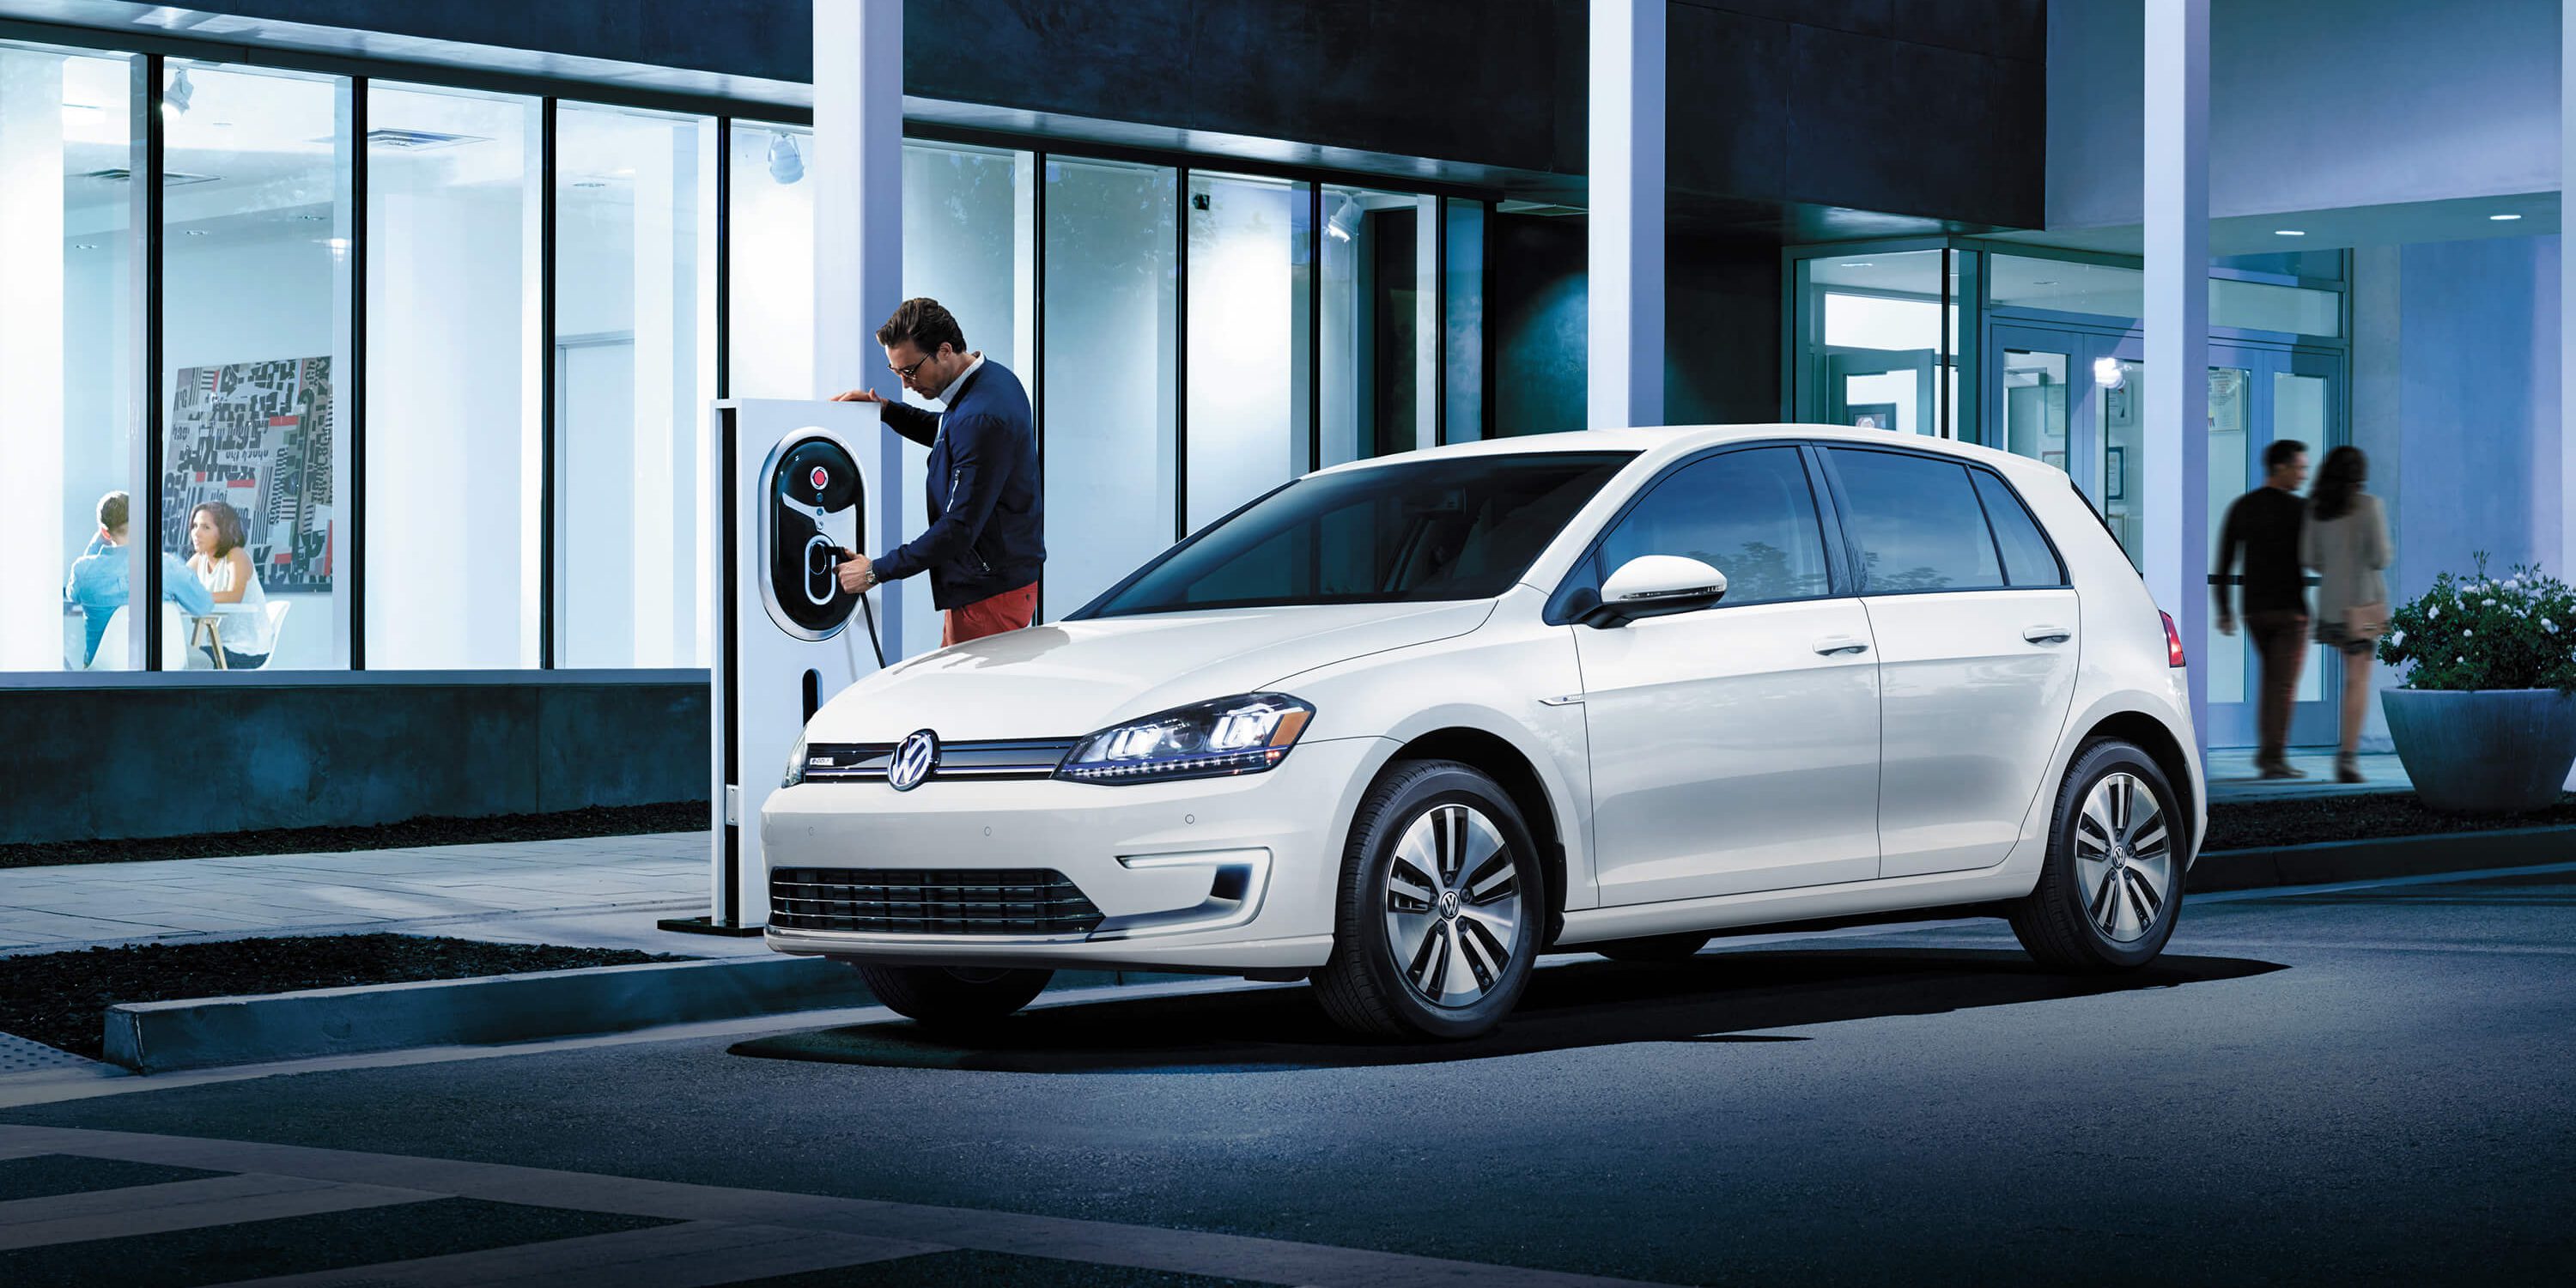 VW to build a 'nationwide 150 kW+ fast charging network' for electric